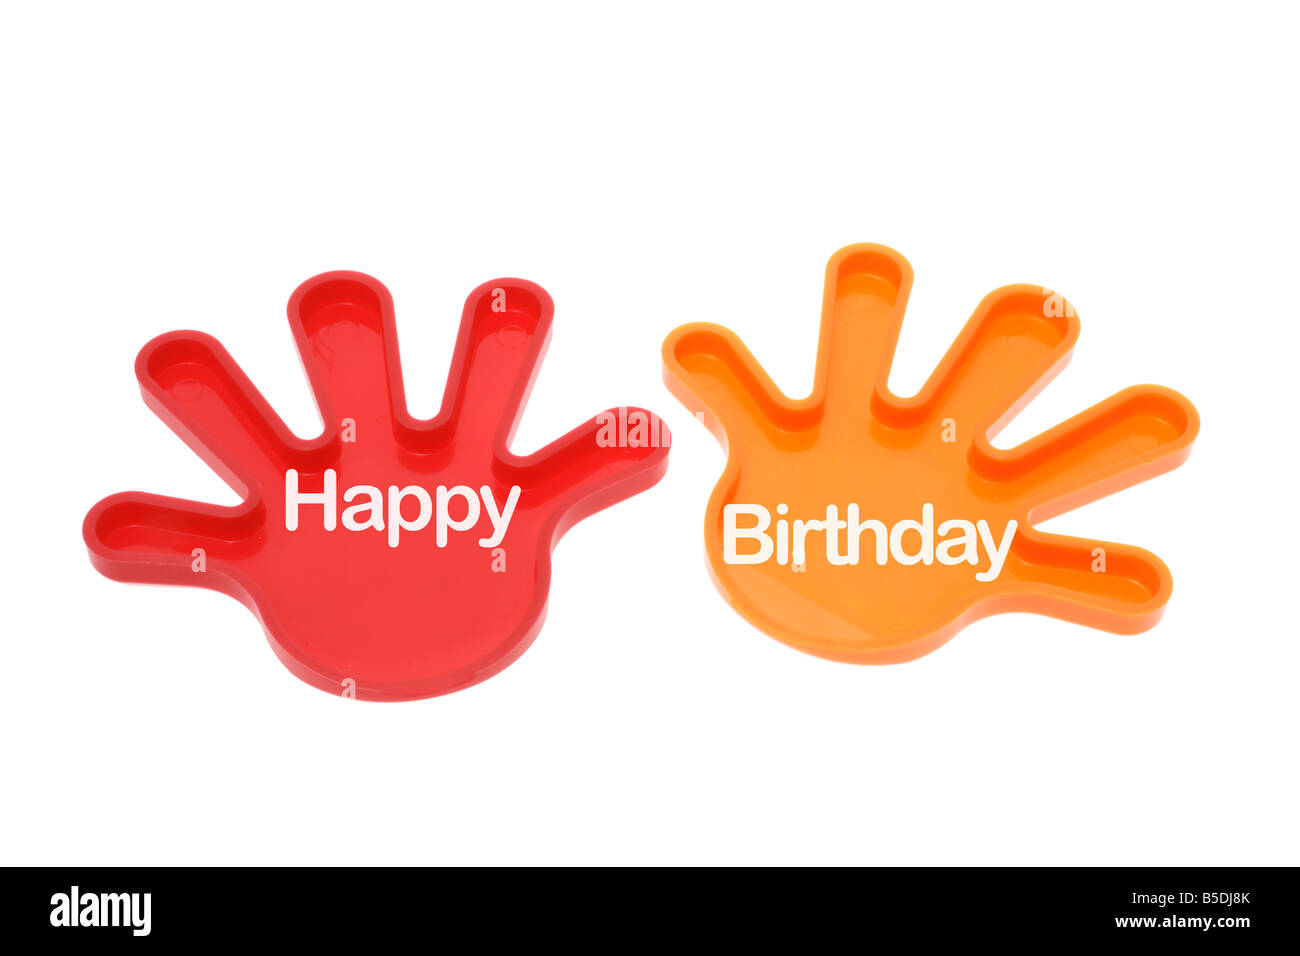 Toy Hands with Happy Birthday Greeting Stock Photo